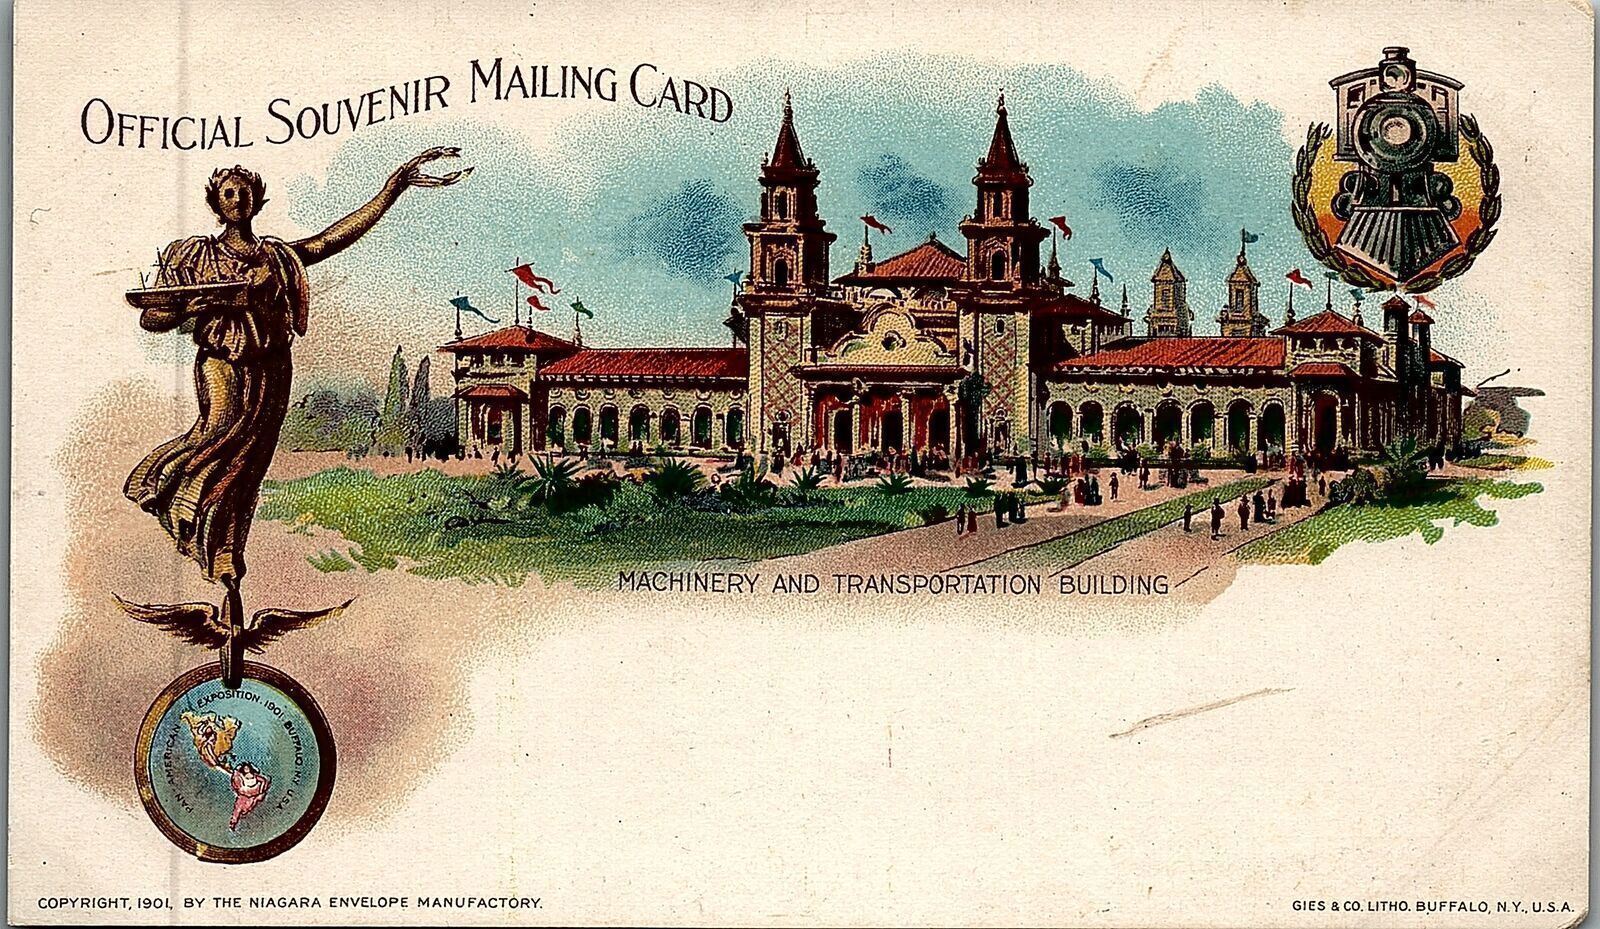 1901 PAN AMERICAN EXPOSITION BUFFALO MACHINERY BLDG PRIVATE MAILING CARD 25-289